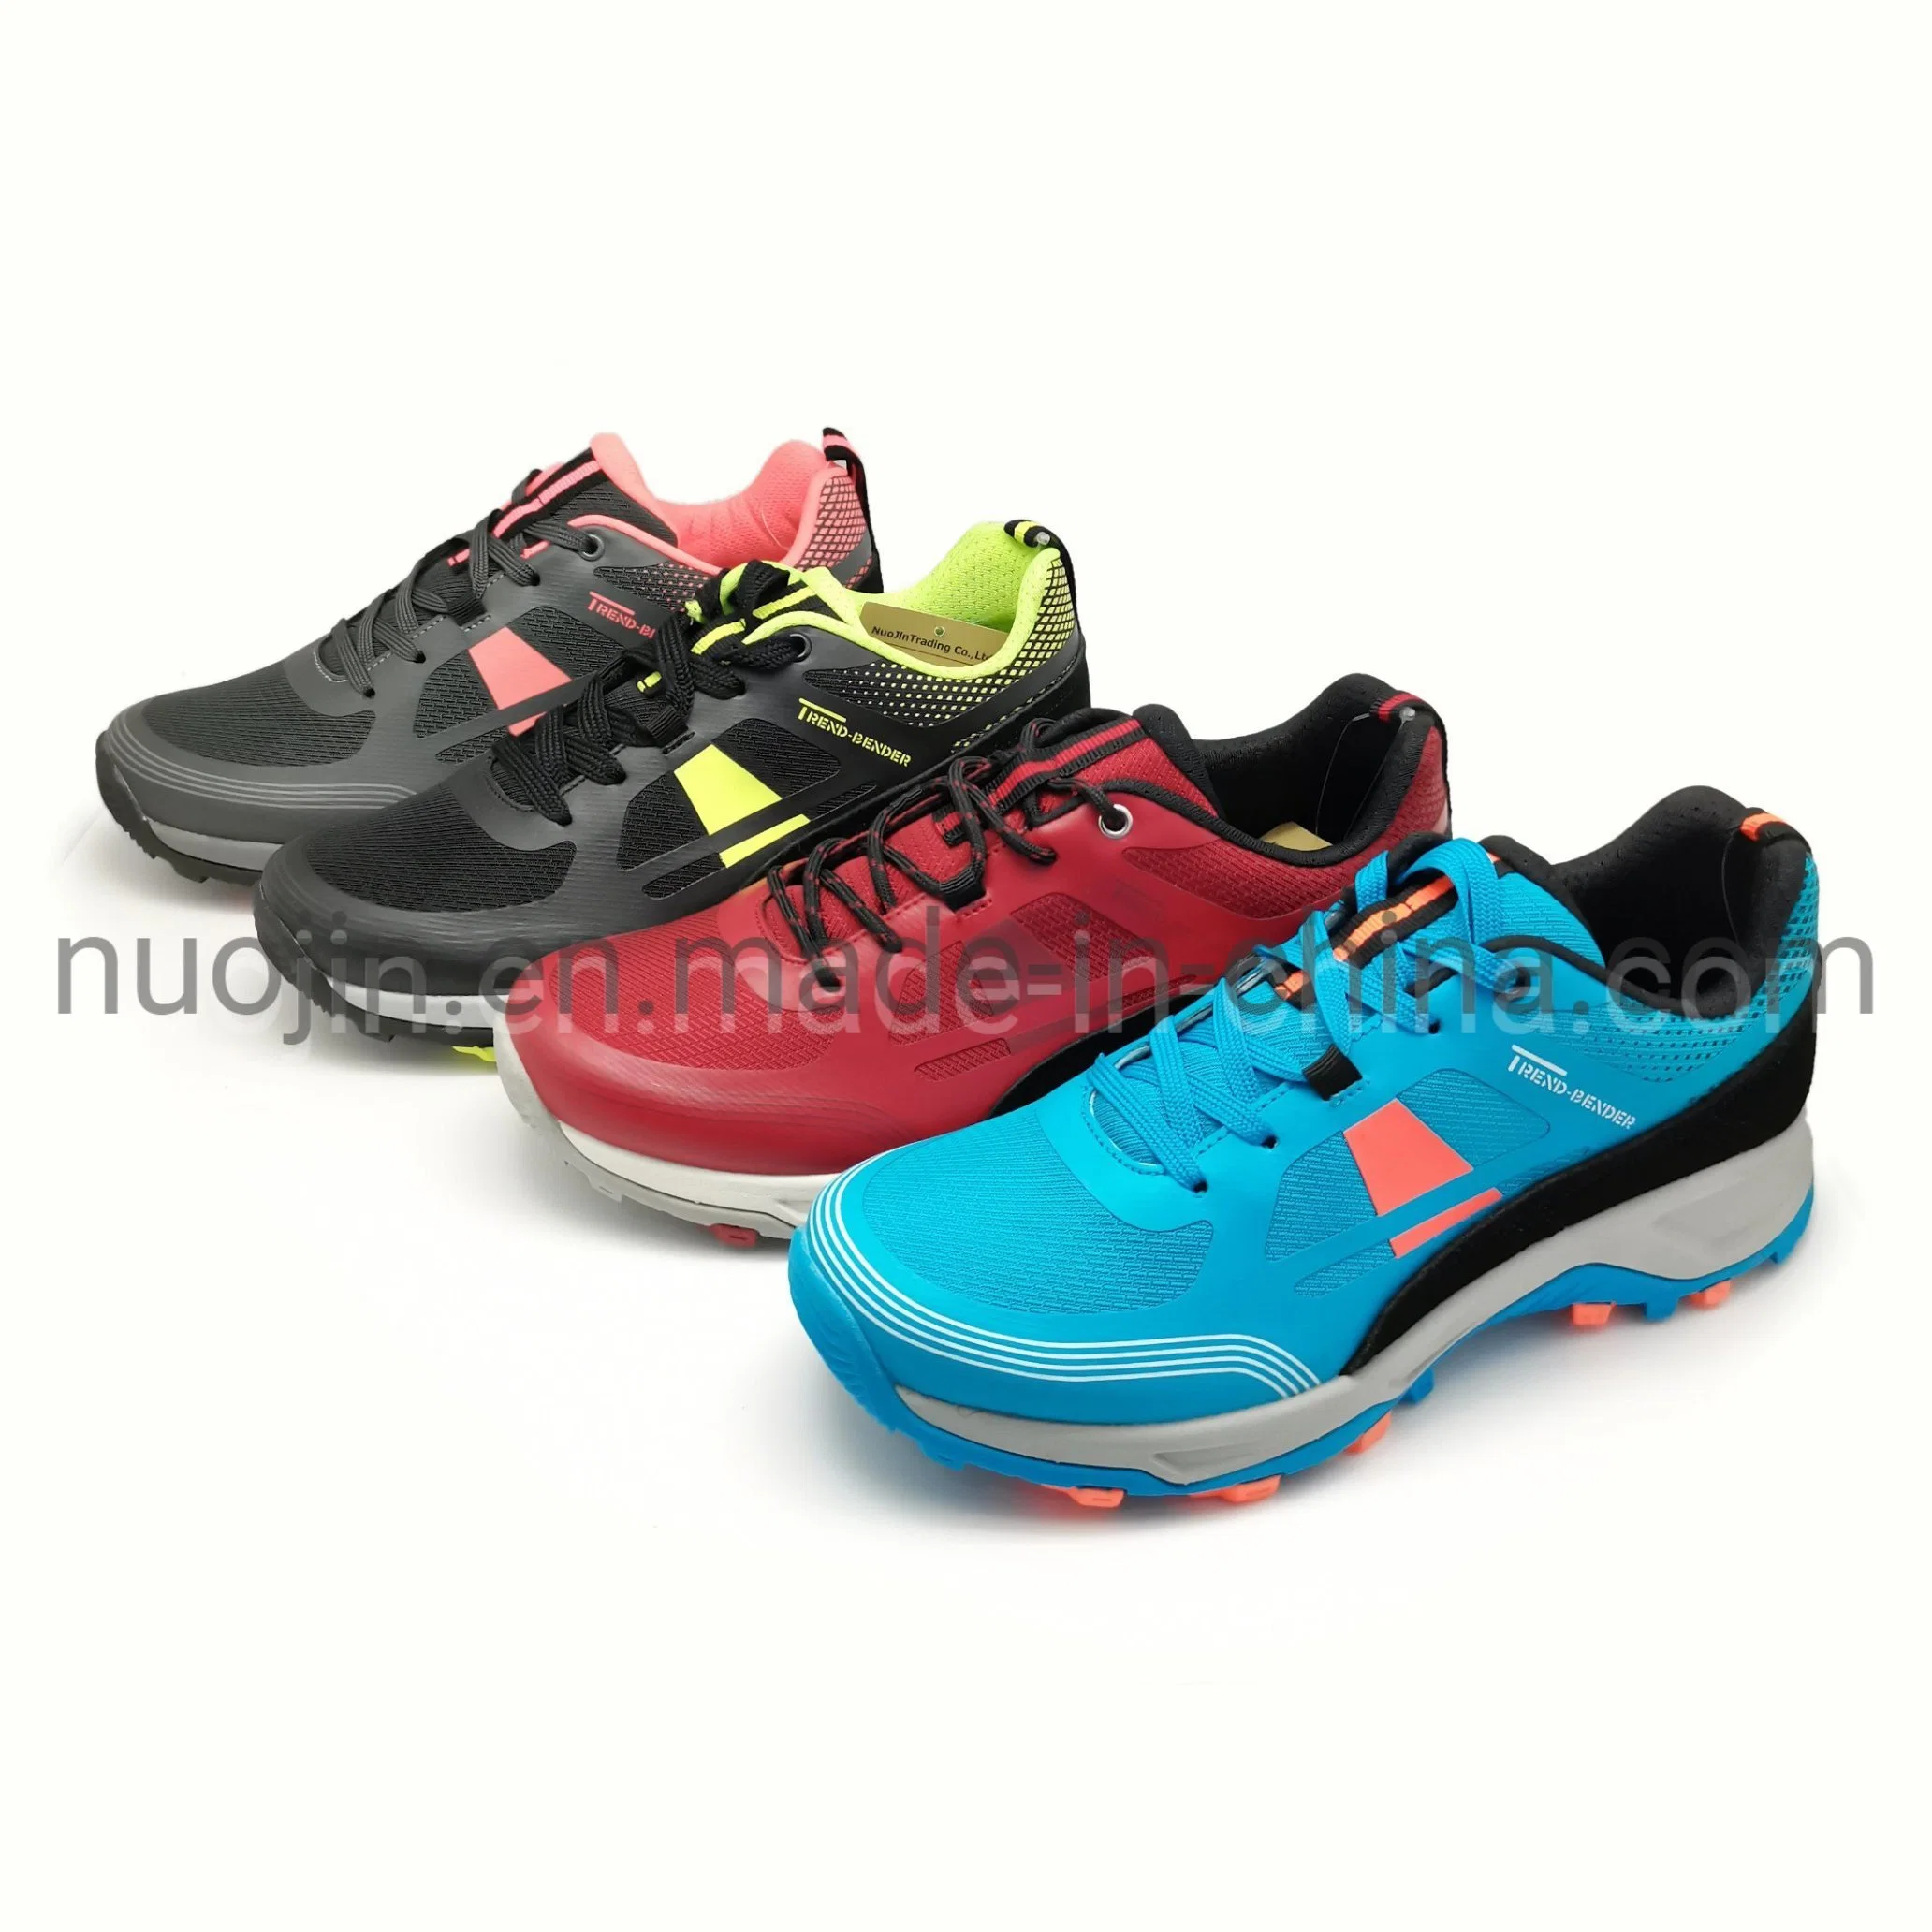 High-Top Men Gender Hiking Outdoor Shoes Casual Sports Shoes